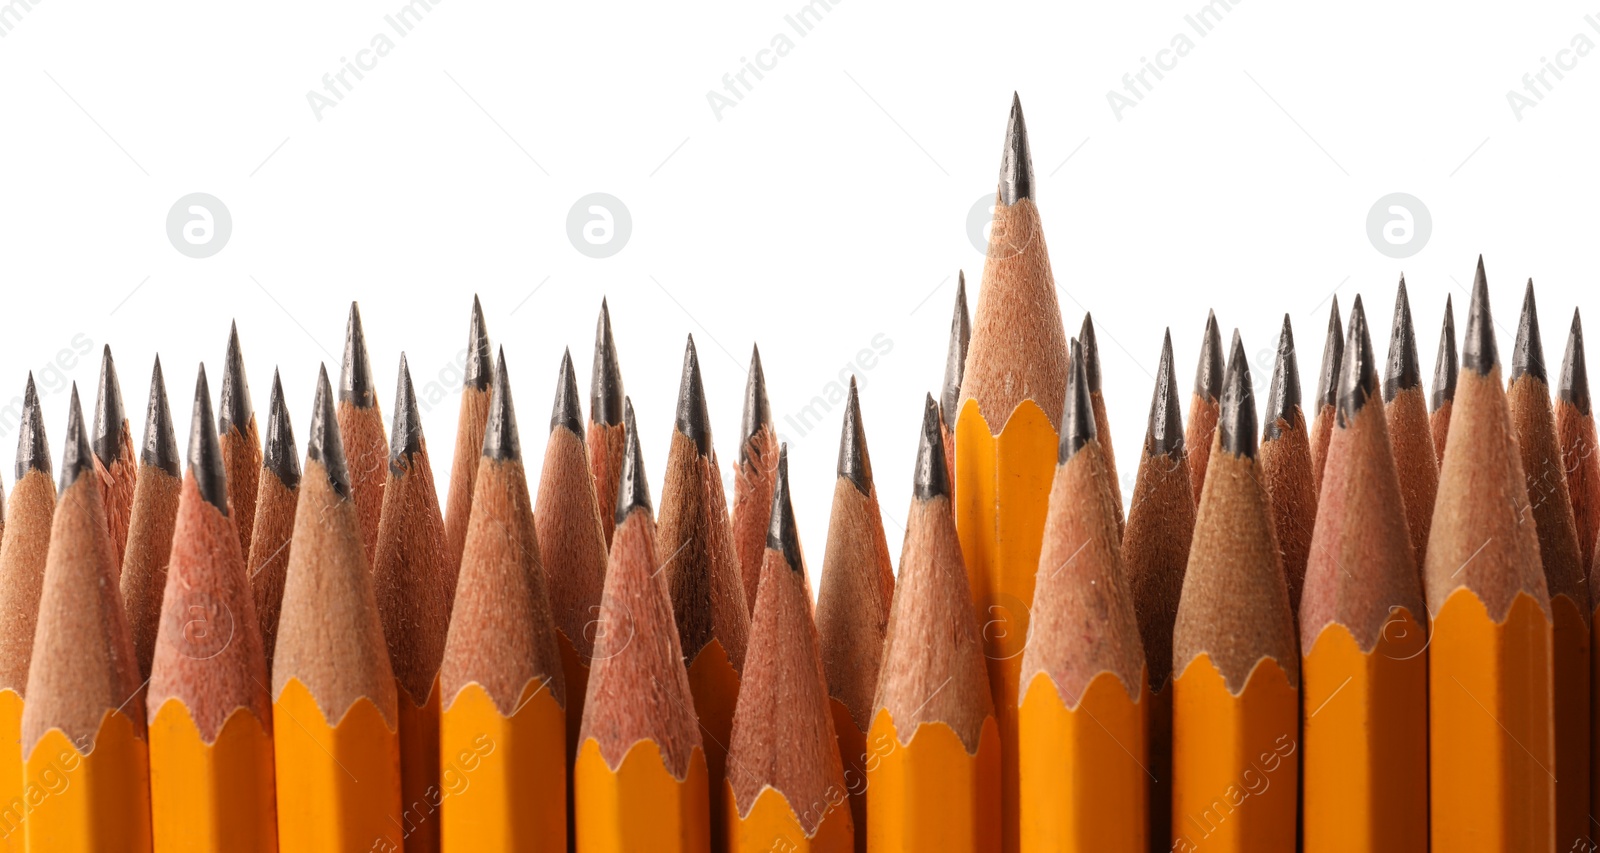 Photo of Many sharp graphite pencils isolated on white